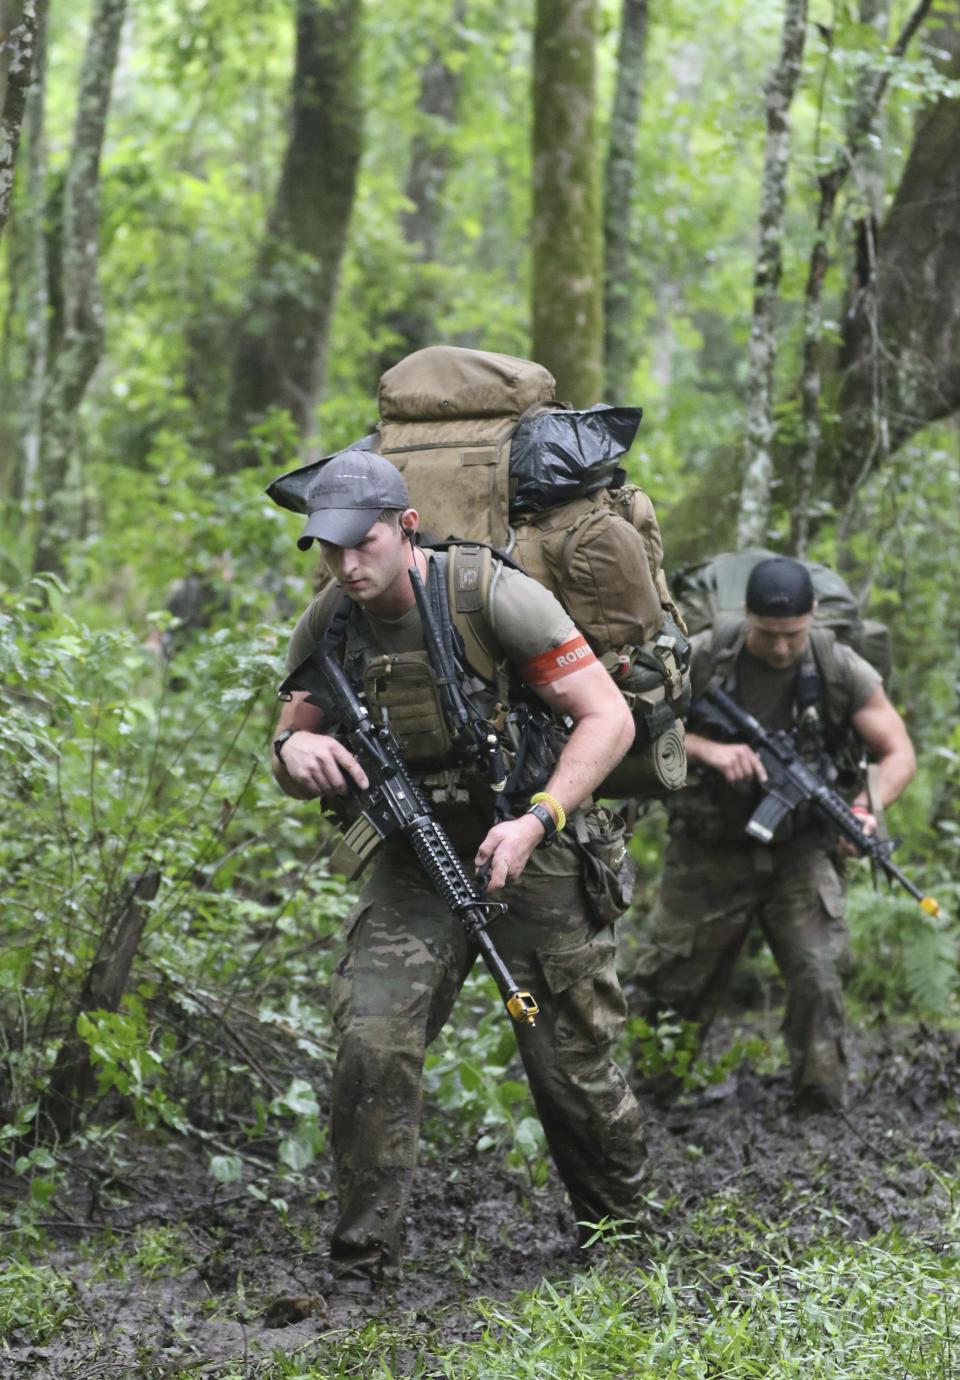 Special Forces candidates assigned to the U.S. Army John F. Kennedy Special Warfare Center and School patrol through a wooded area during the final phase of field training known as Robin Sage in central North Carolina, July 9, 2019. U.S. special operations commanders are having to do more with less and they're learning from the war in Ukraine, That means juggling how to add more high-tech experts to their teams while still cutting their overall forces by about 5,000 troops over the next five years. (Ken Kassens/U.S. Army via AP)